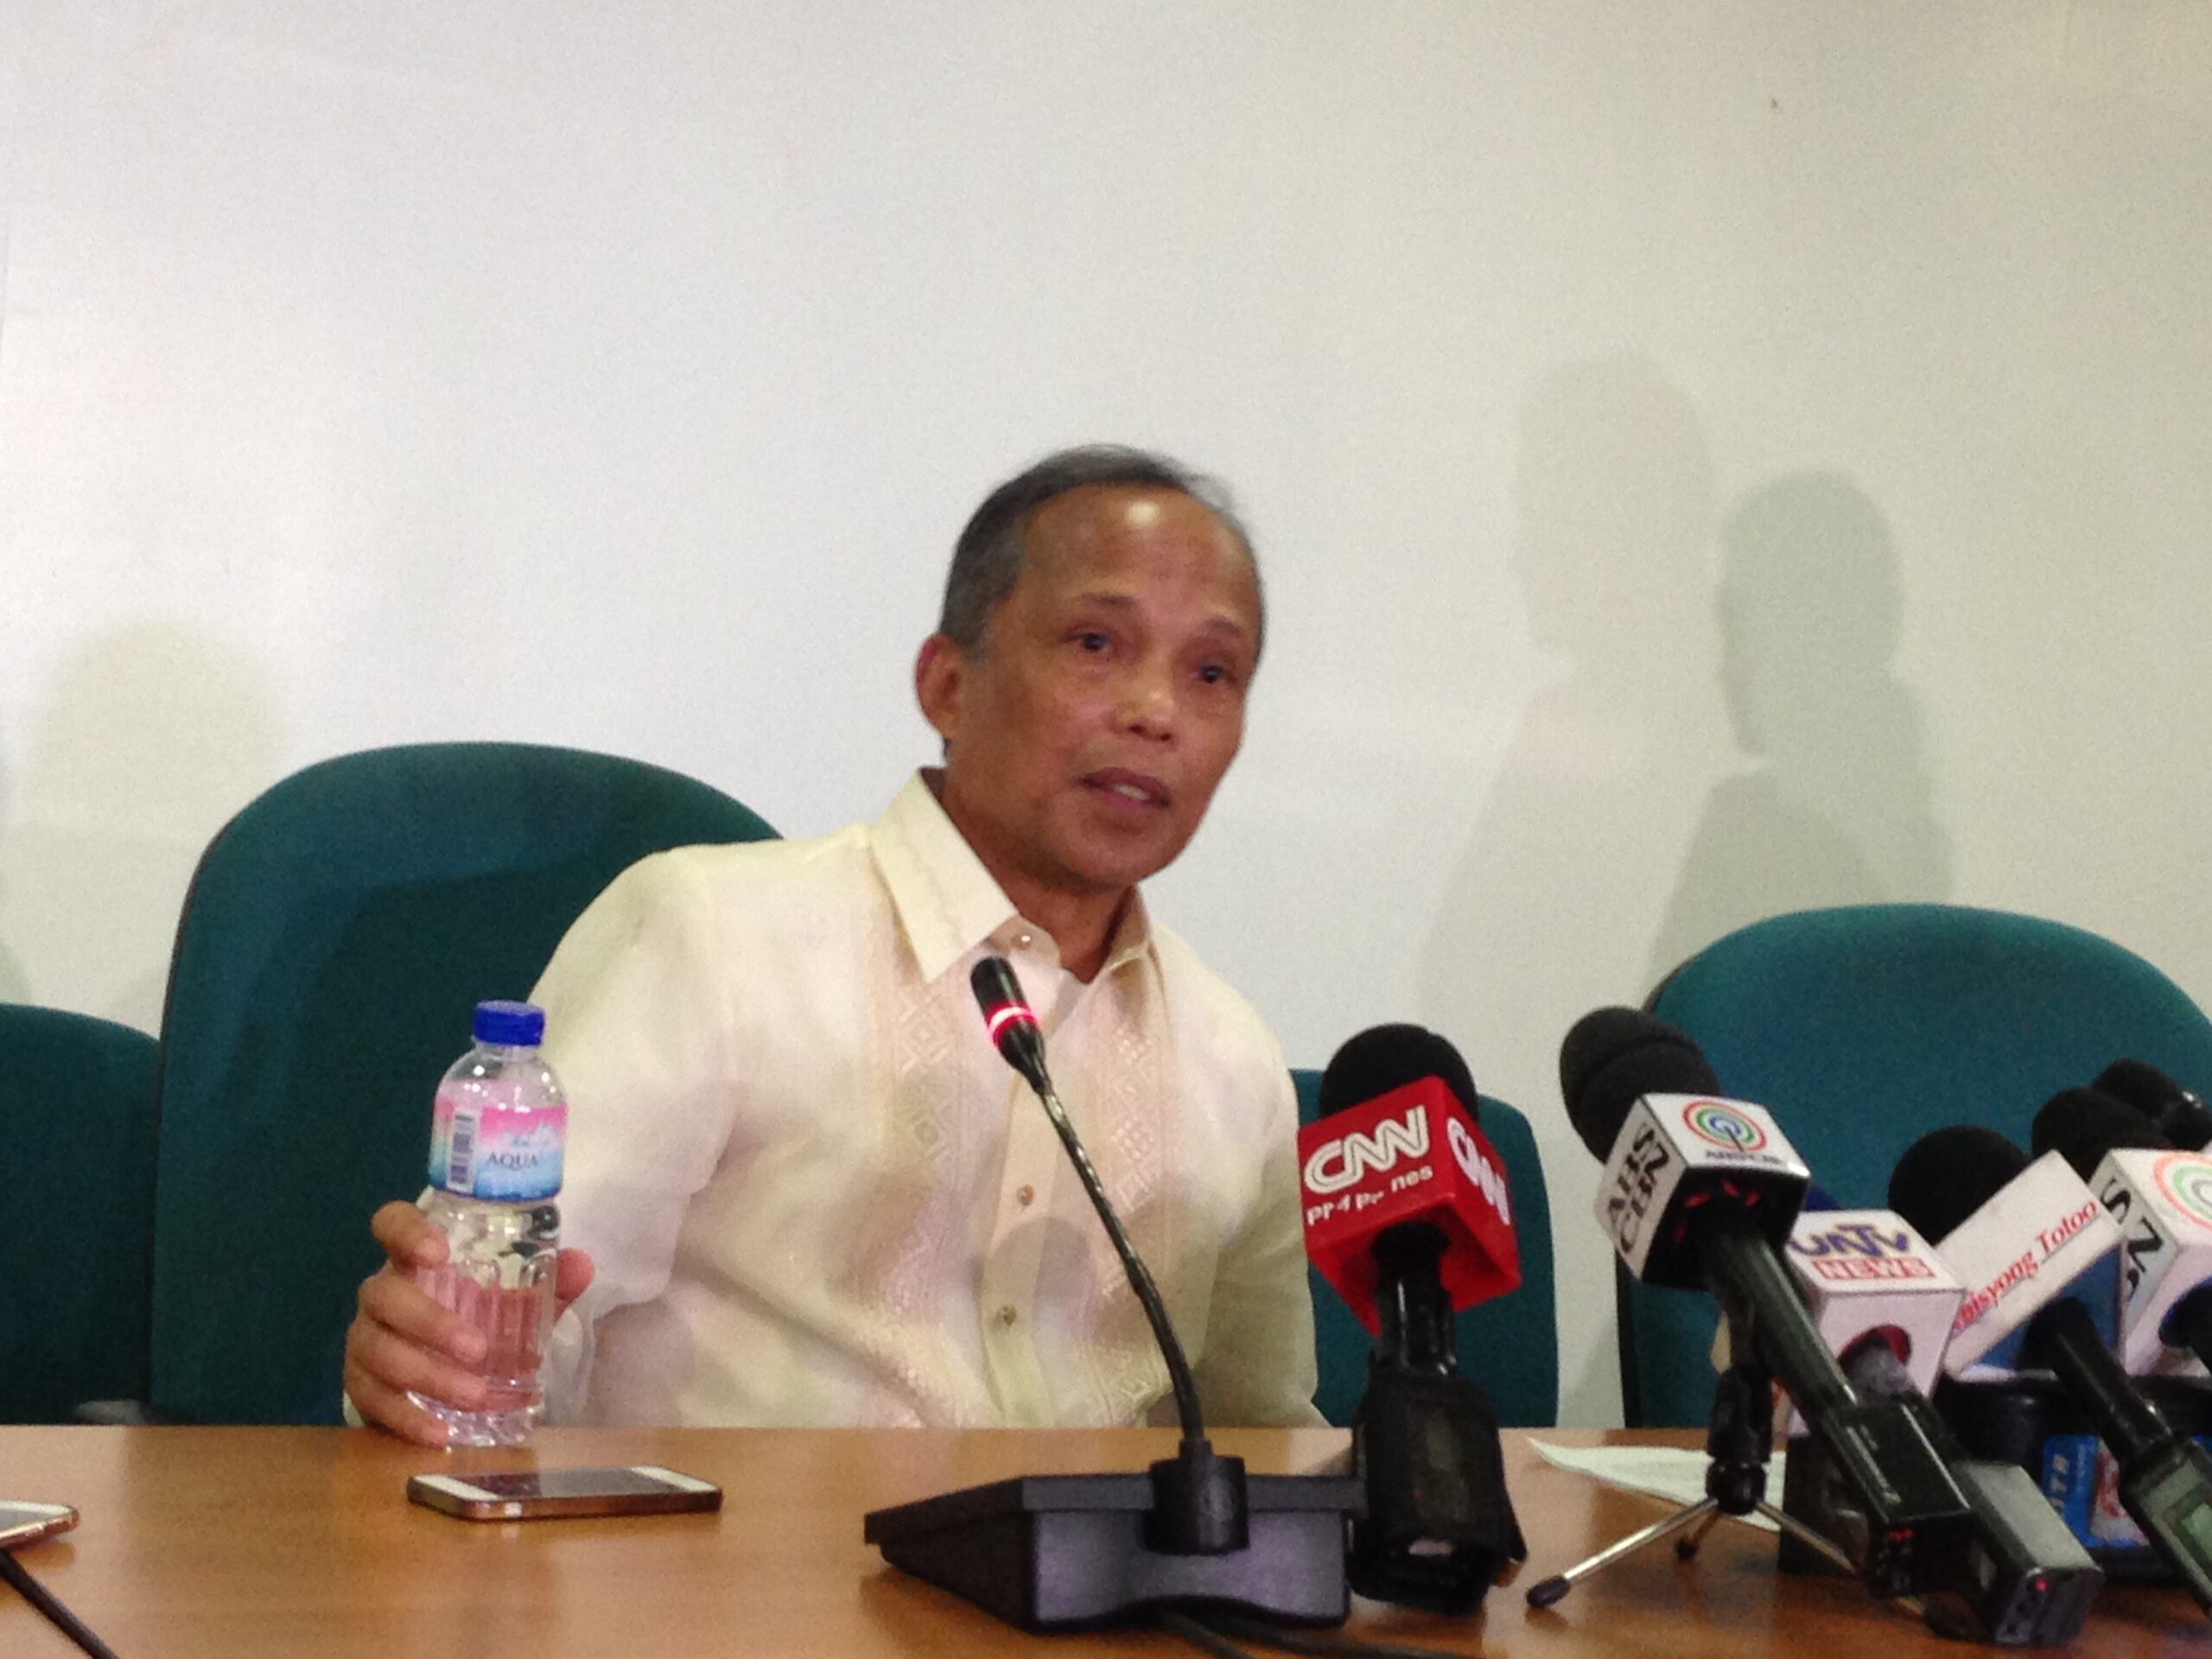 DOE chief Cusi: Arroyo, Aboitiz have nothing to do with my post